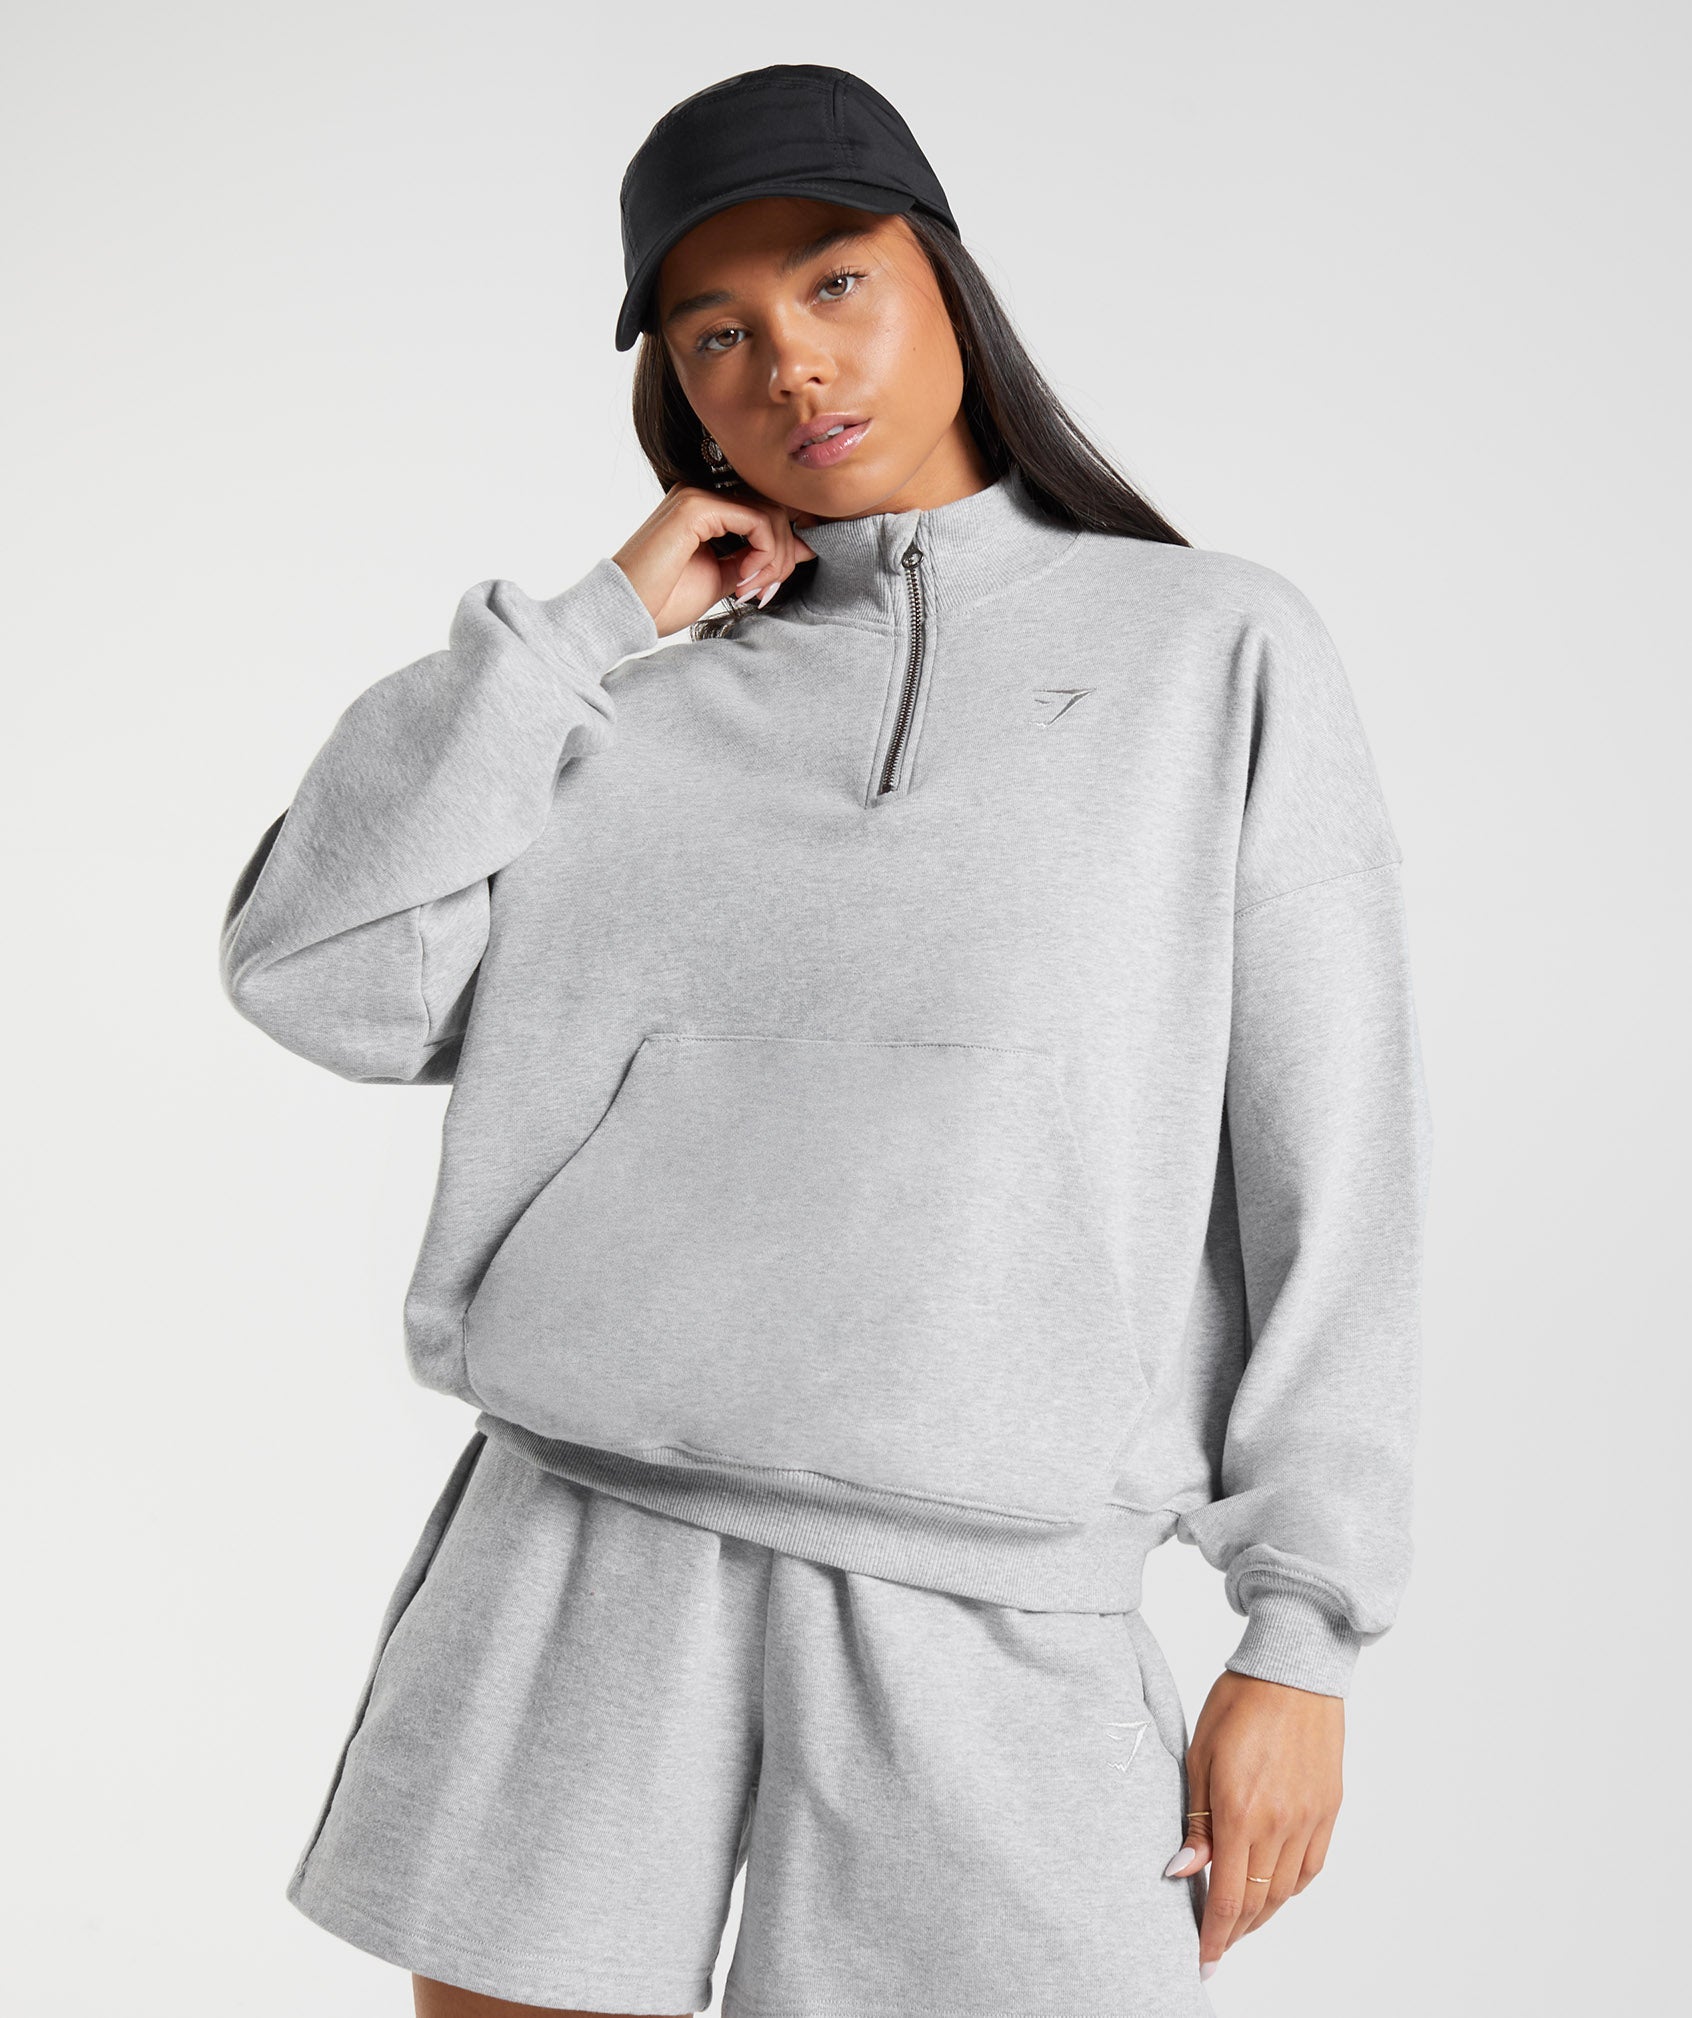 Rest Day Sweats 1/2 Zip Pullover in Light Grey Core Marl - view 2